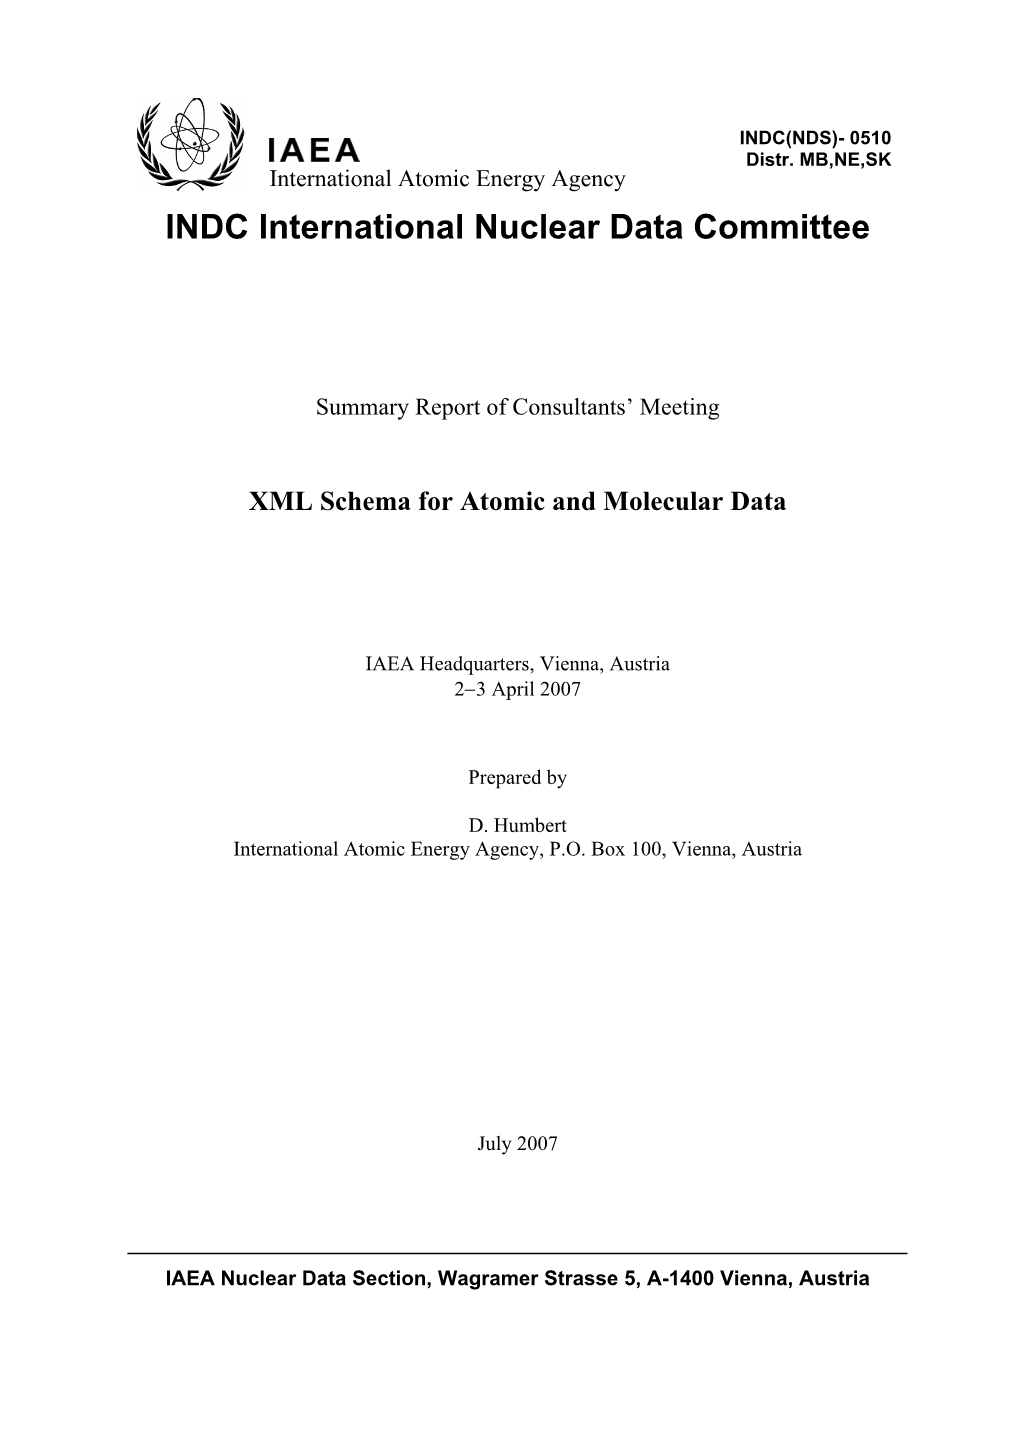 INDC International Nuclear Data Committee